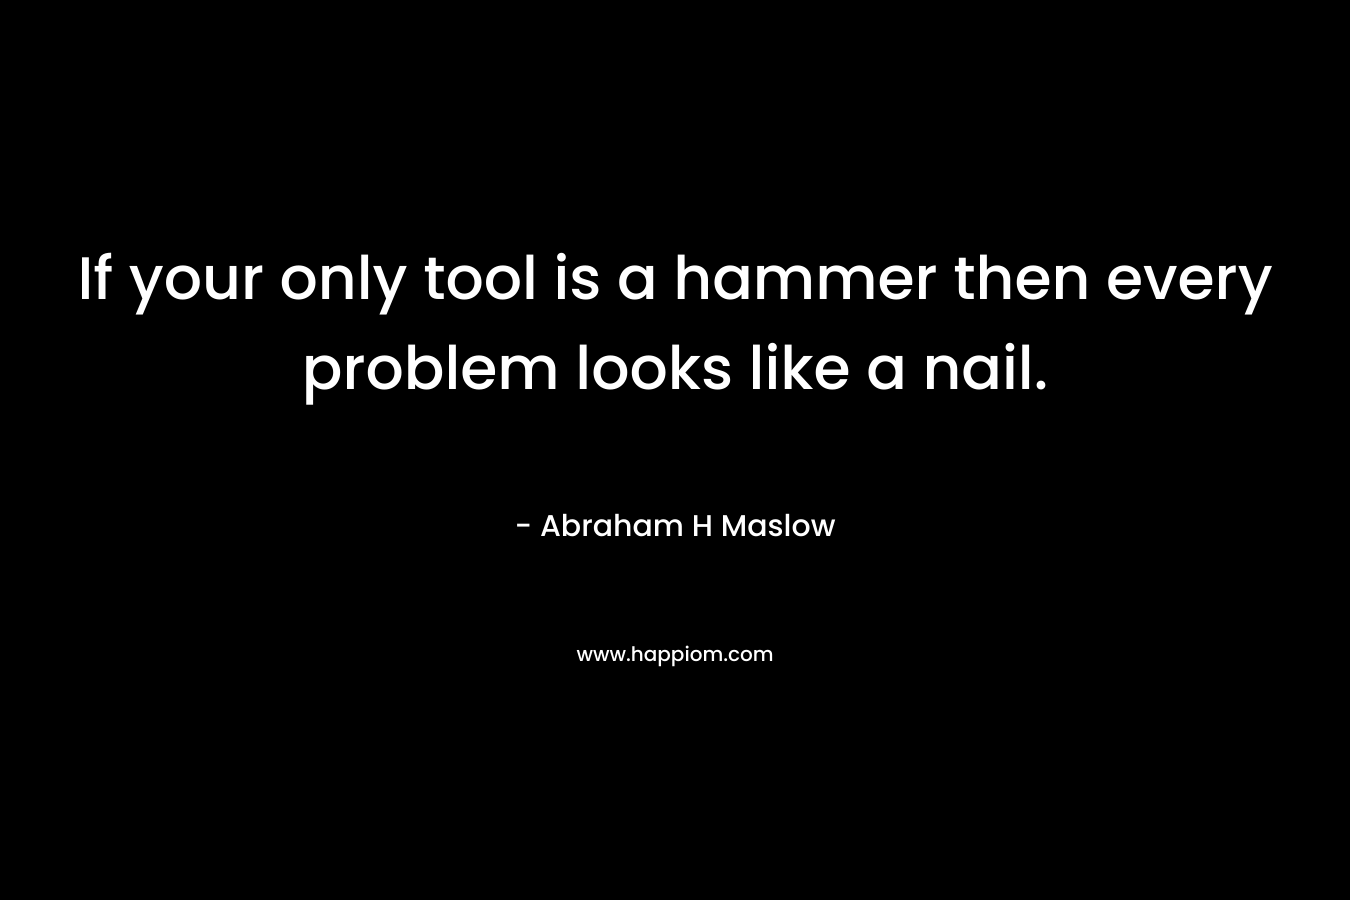 If your only tool is a hammer then every problem looks like a nail. – Abraham H Maslow